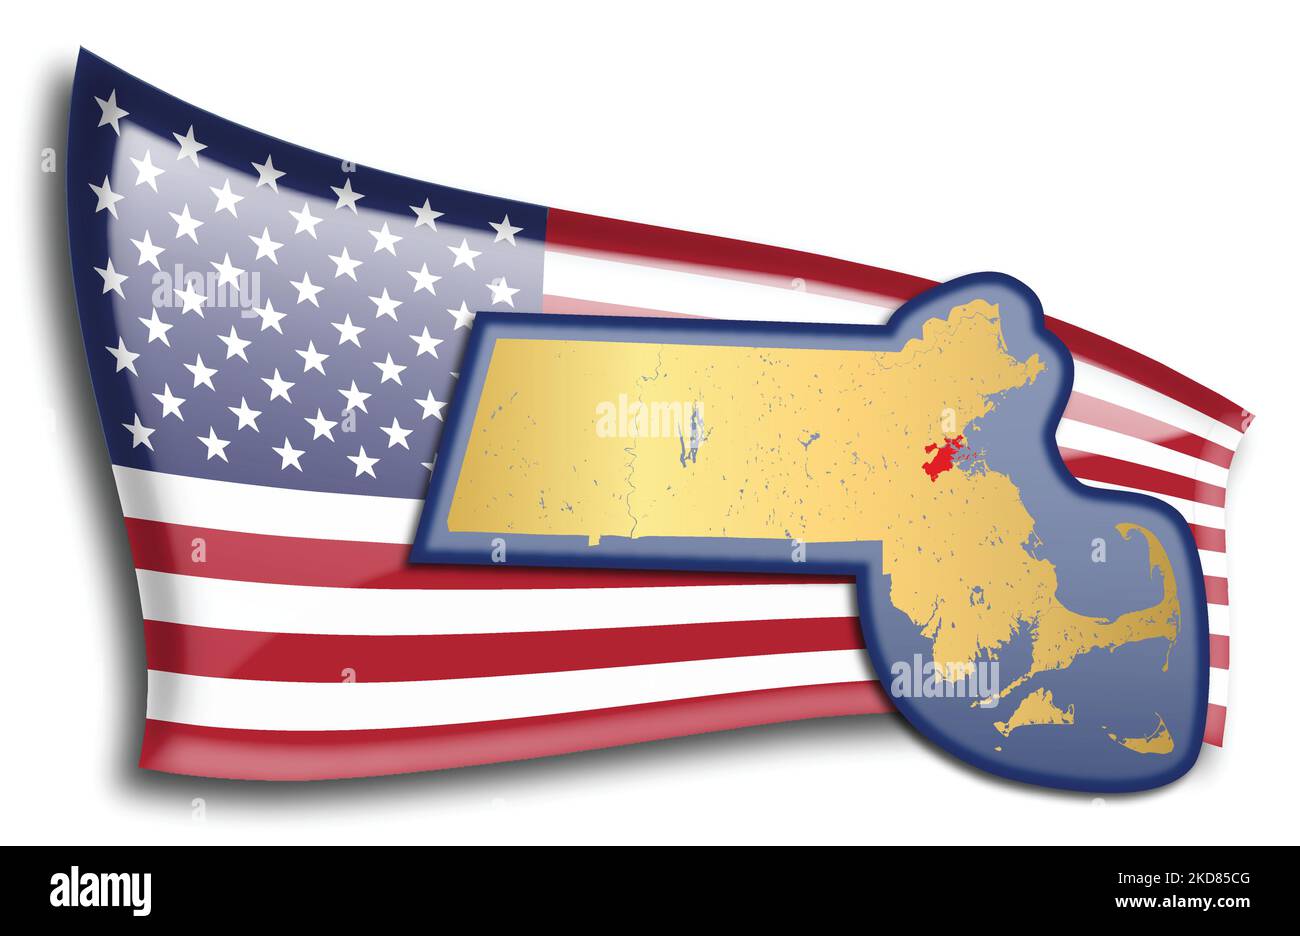 U.S. states - map of Massachusetts against an American flag. Rivers and lakes are shown on the map. American Flag and State Map can be used separately Stock Vector